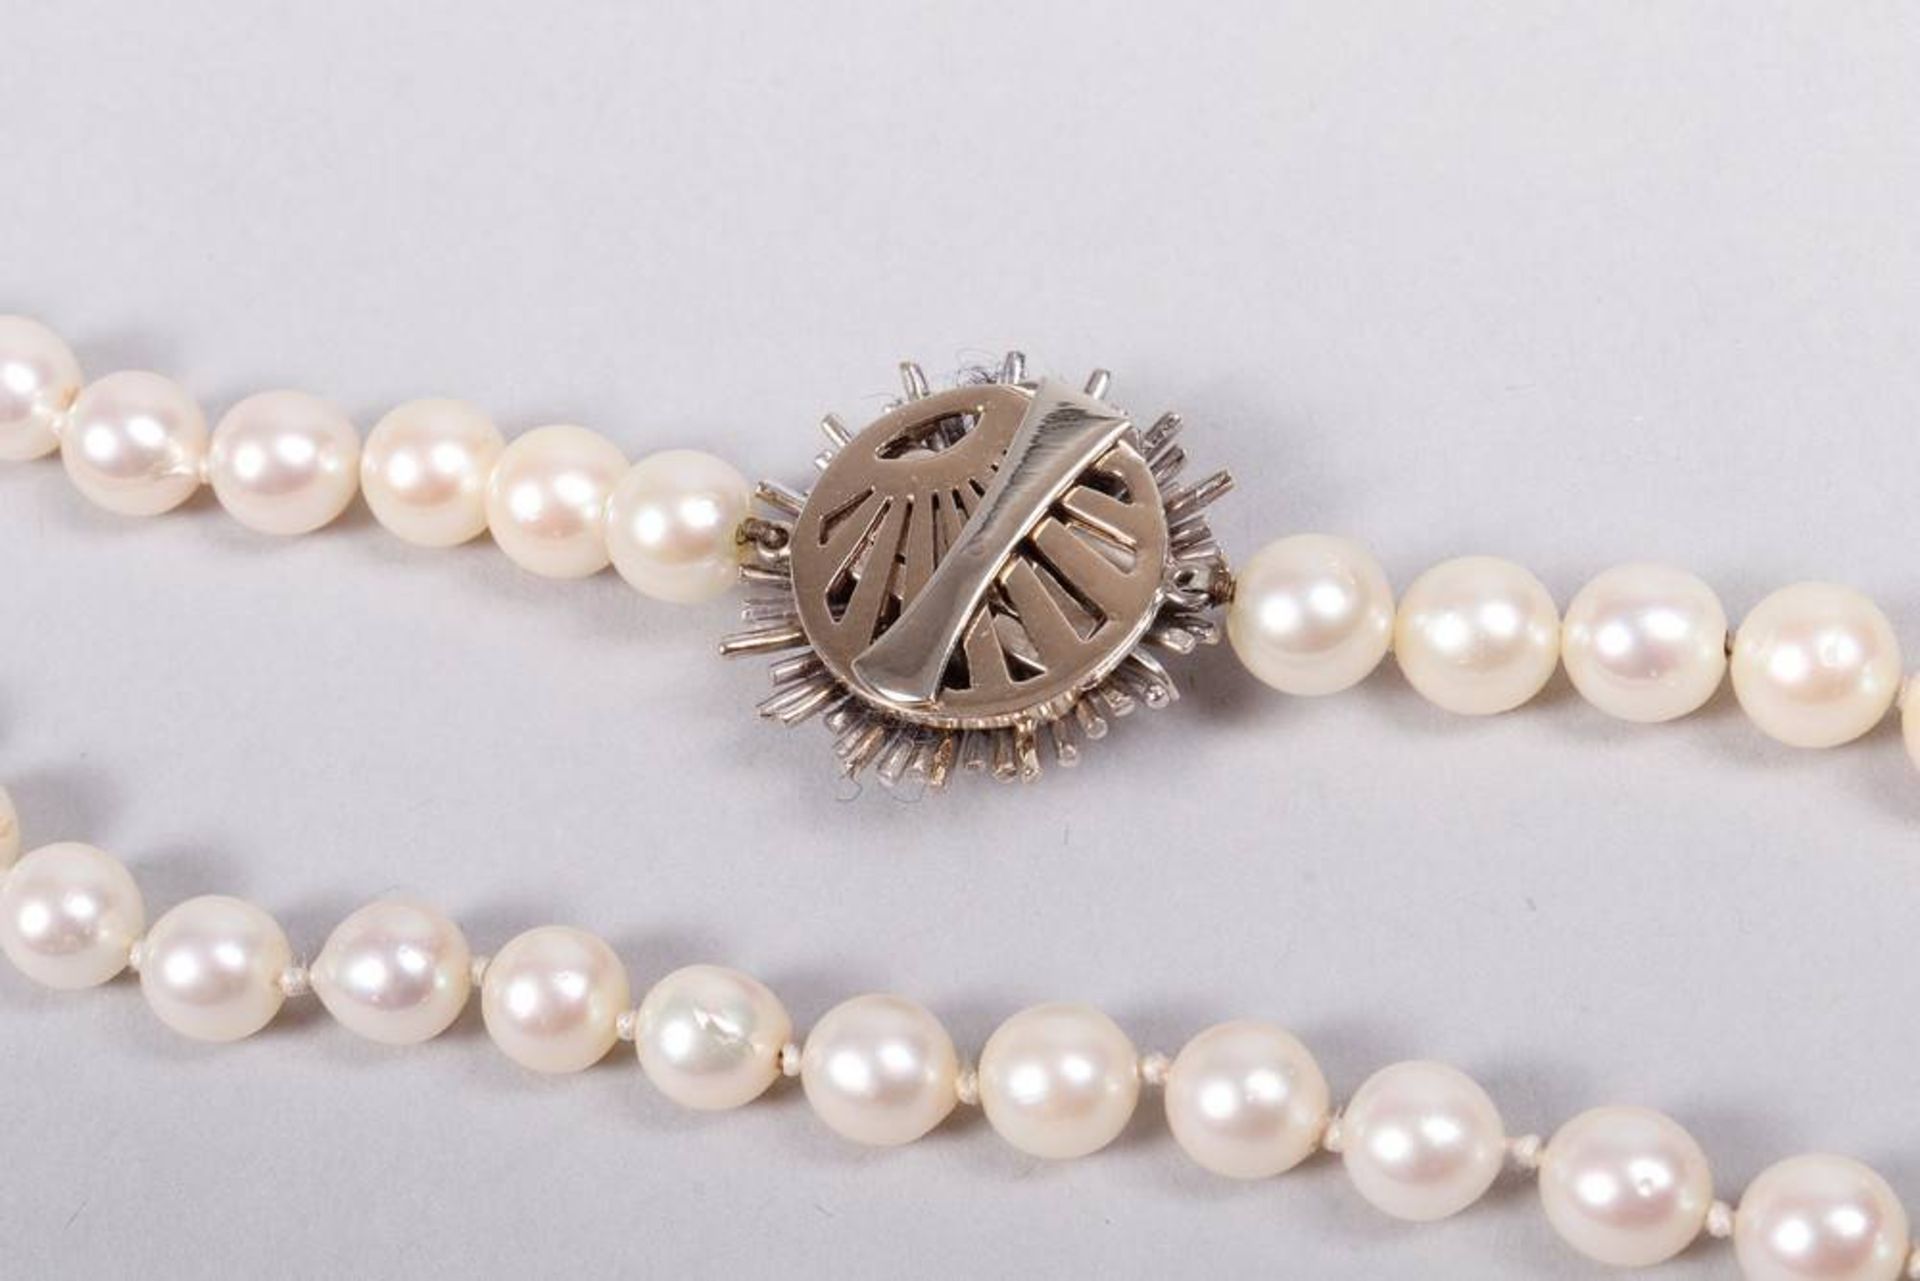 Pearl necklace - Image 3 of 4